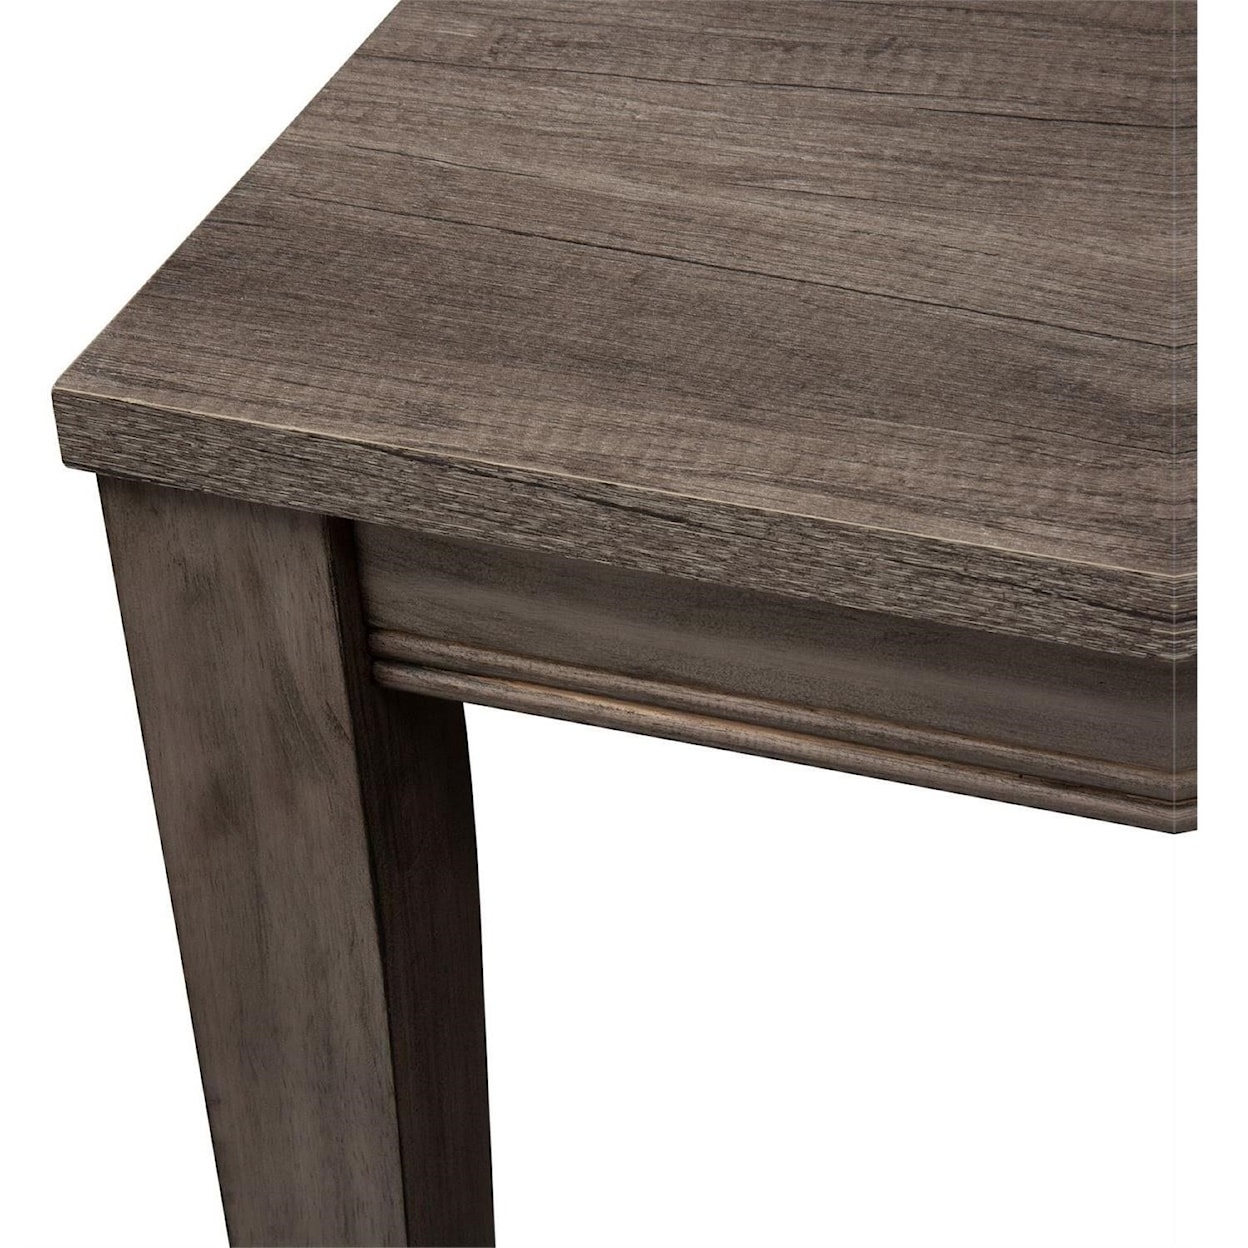 Liberty Furniture Tanners Creek Dining Table